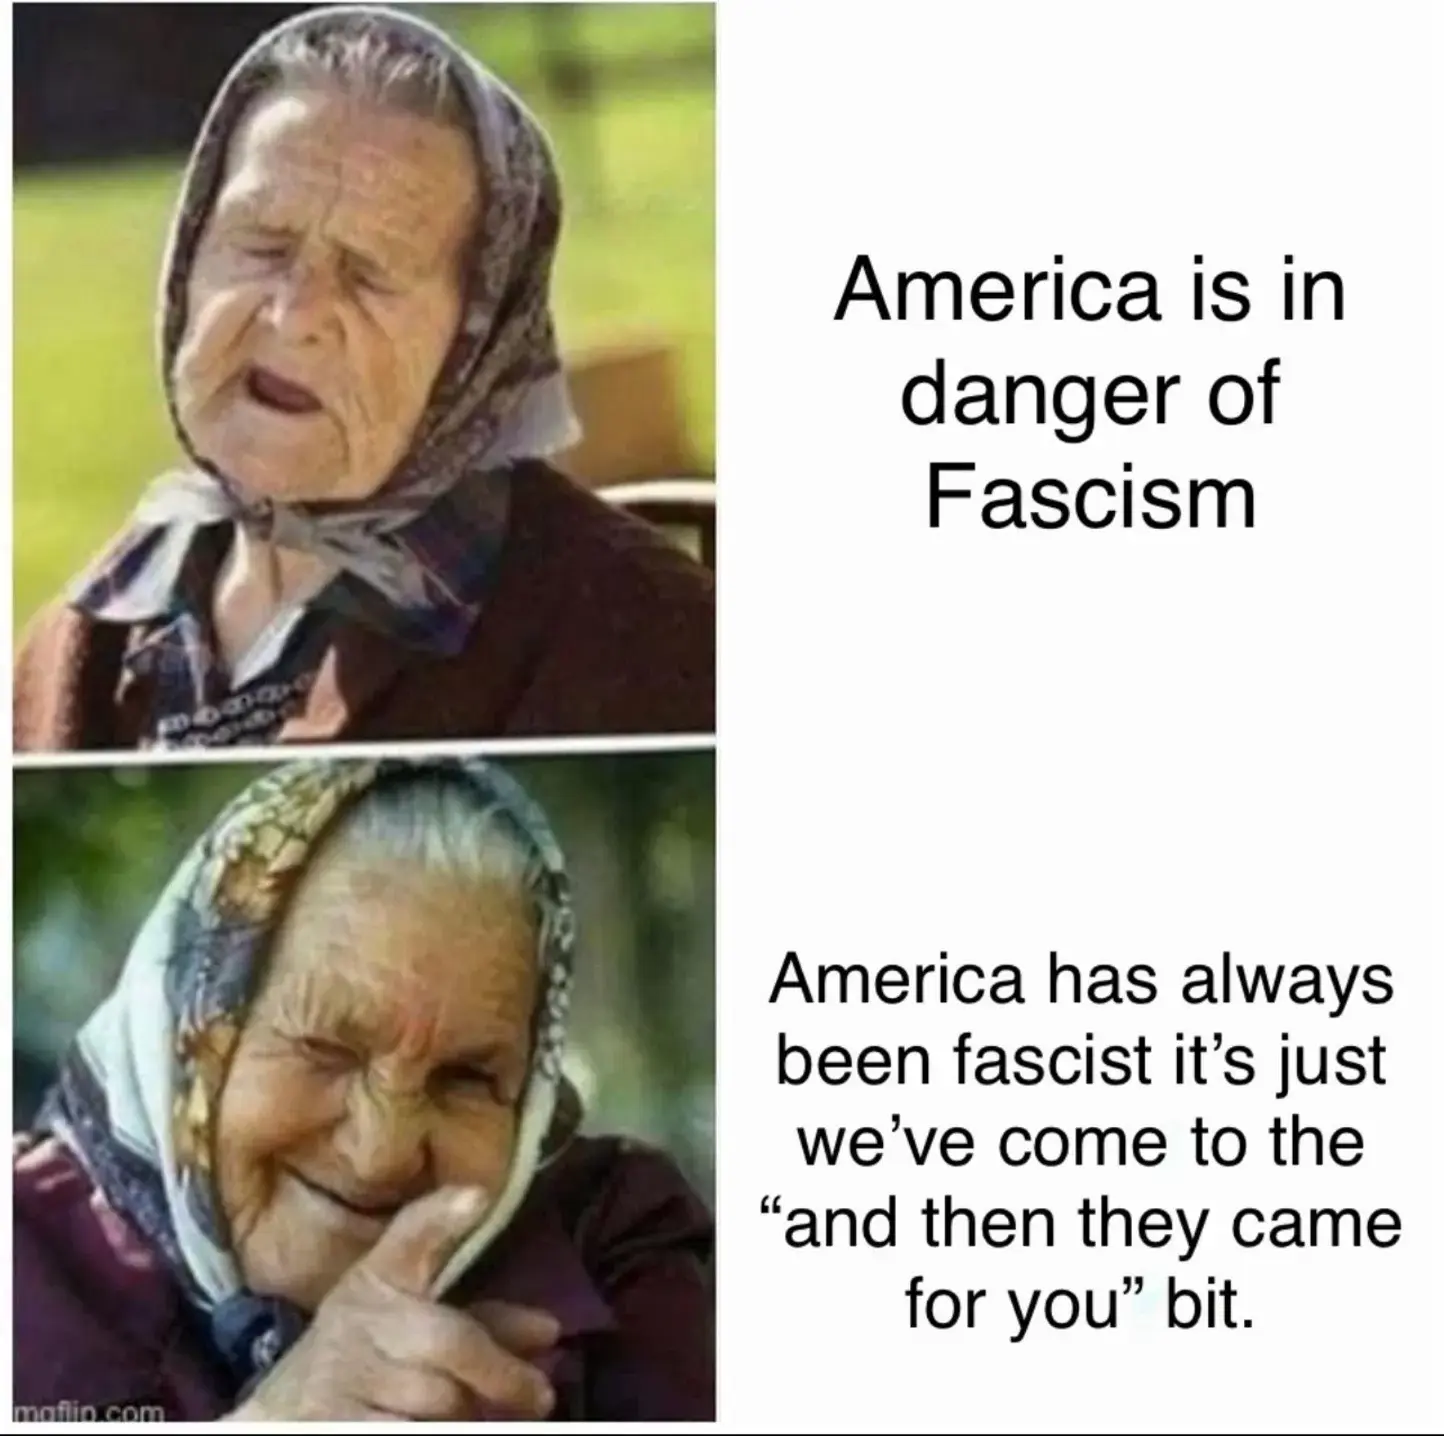 Still image. Two panel meme.   First panel:  Older person wearing a headscarf and an exasperated expression, eyes closed, mouth open.   Text to the right reads:  America is in  danger of  Fascism   Second panel:  Older person wearing a headscarf, right hand pointing at the reader, index finger outstretched, smiling expression.   Text to the right reads: America has always  been fascist it's just  we've come to the  "and then they came  for you" bit.